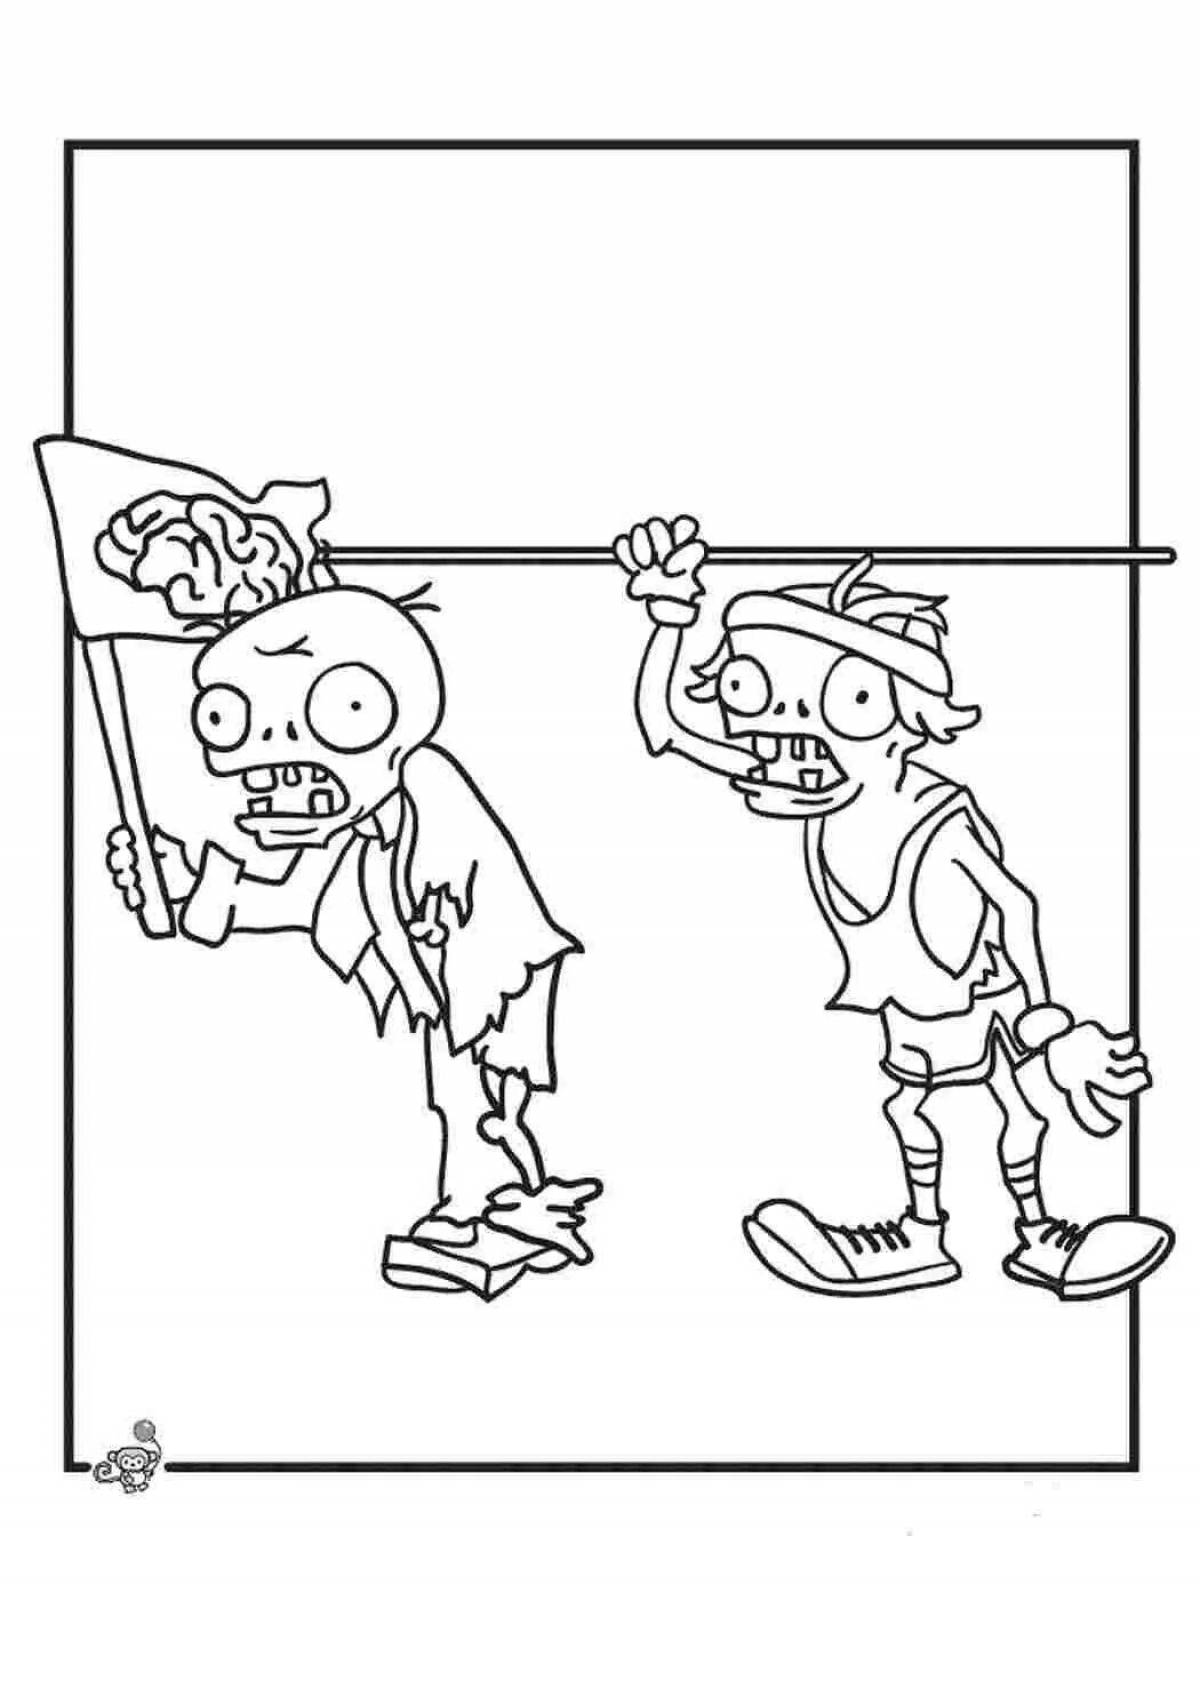 Amazing zombie coloring page